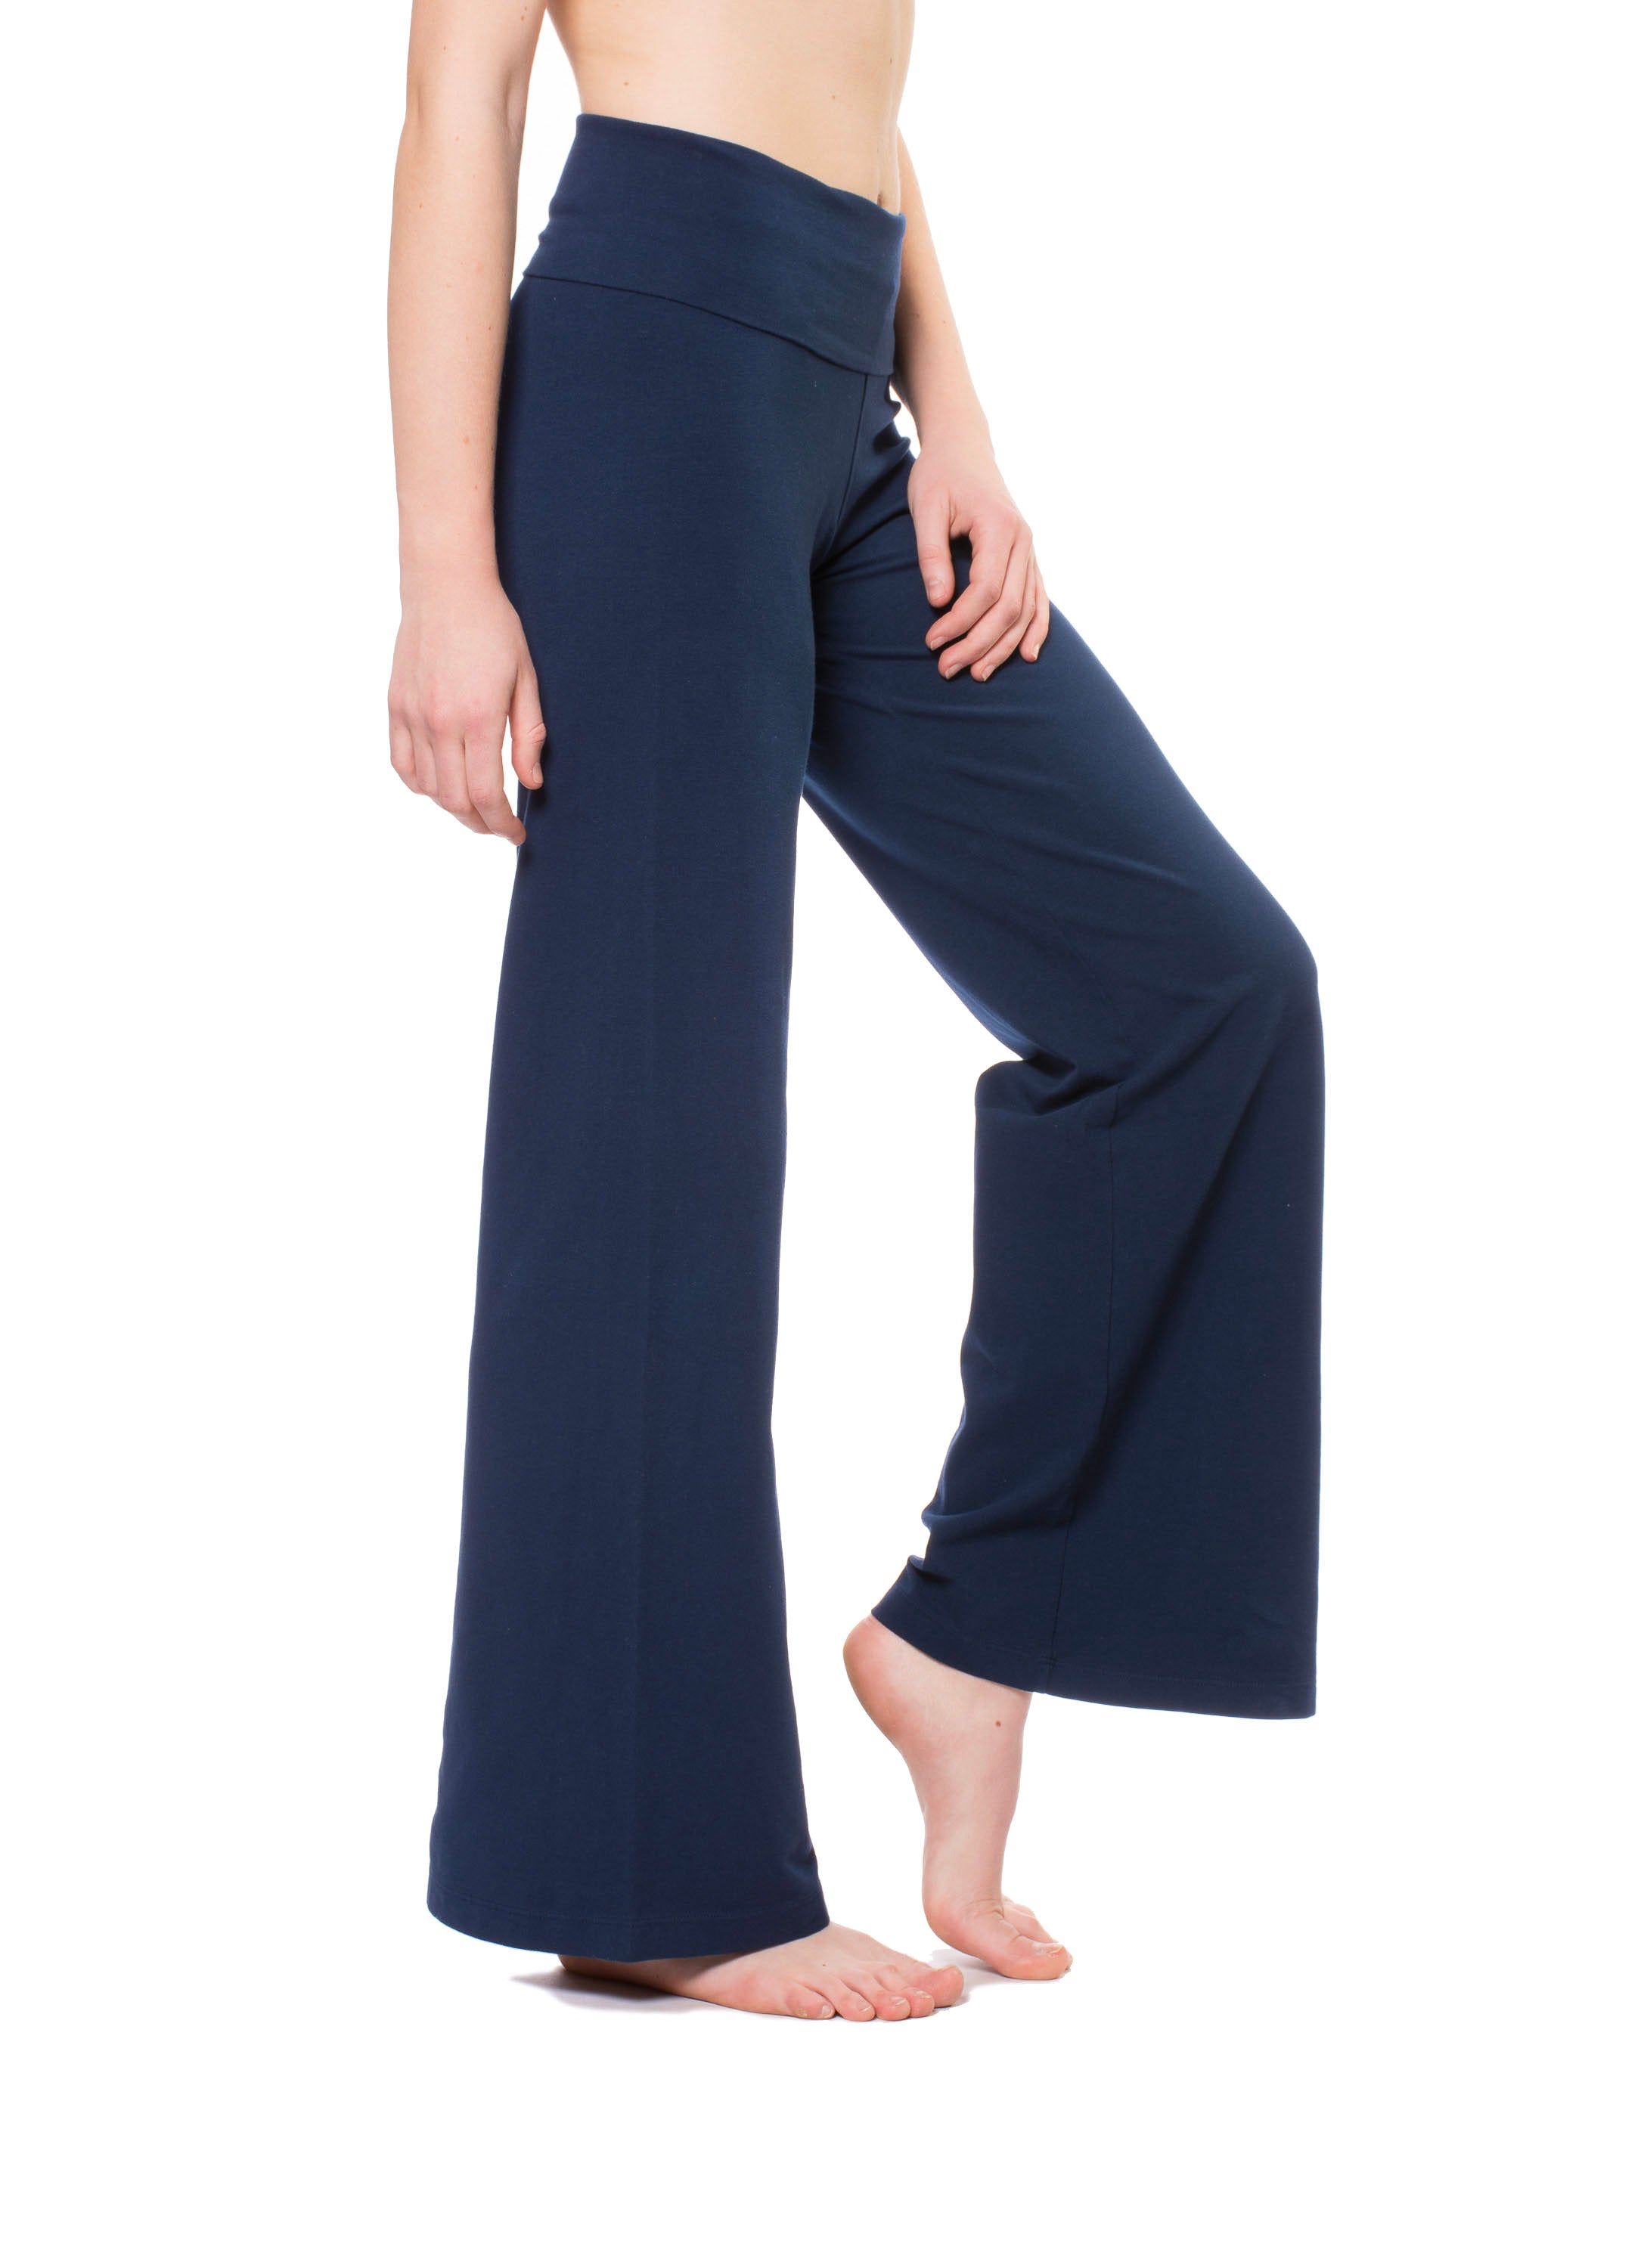 Wide Leg Roll Down Pants (Style W-326, Midnight Blue) by Hard Tail